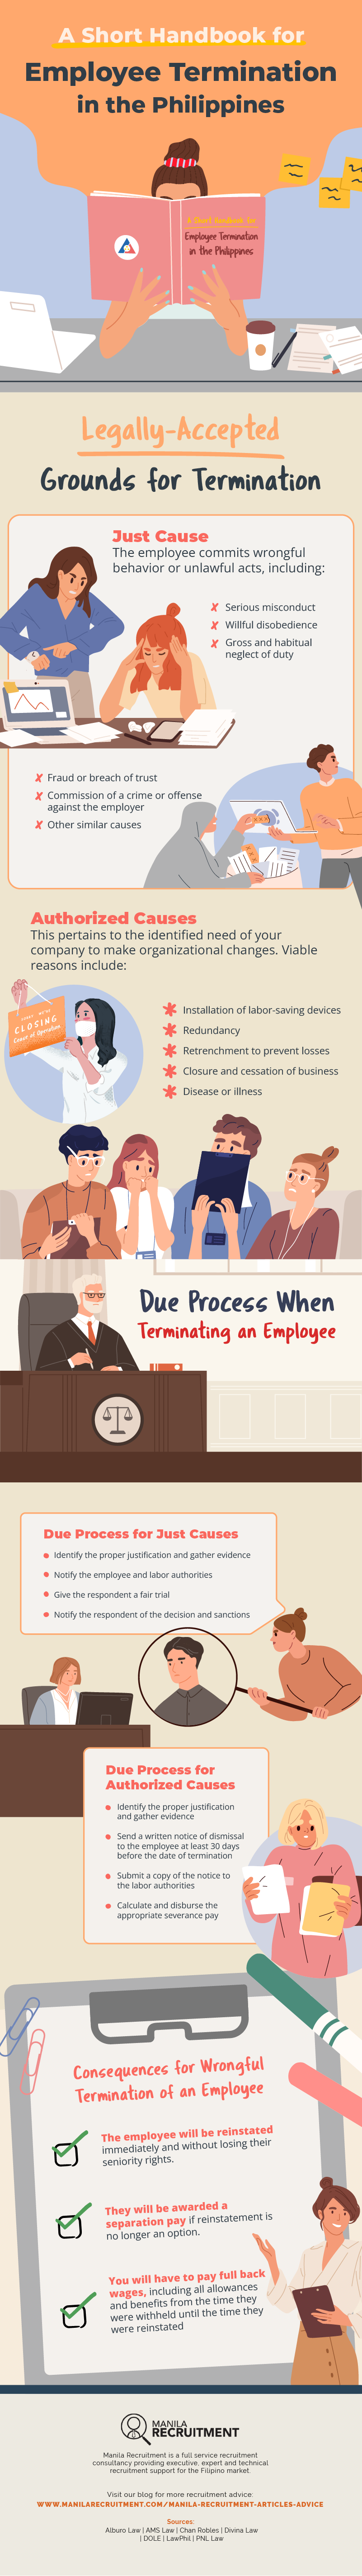 a short handbook for employee termination in the philippines infographic